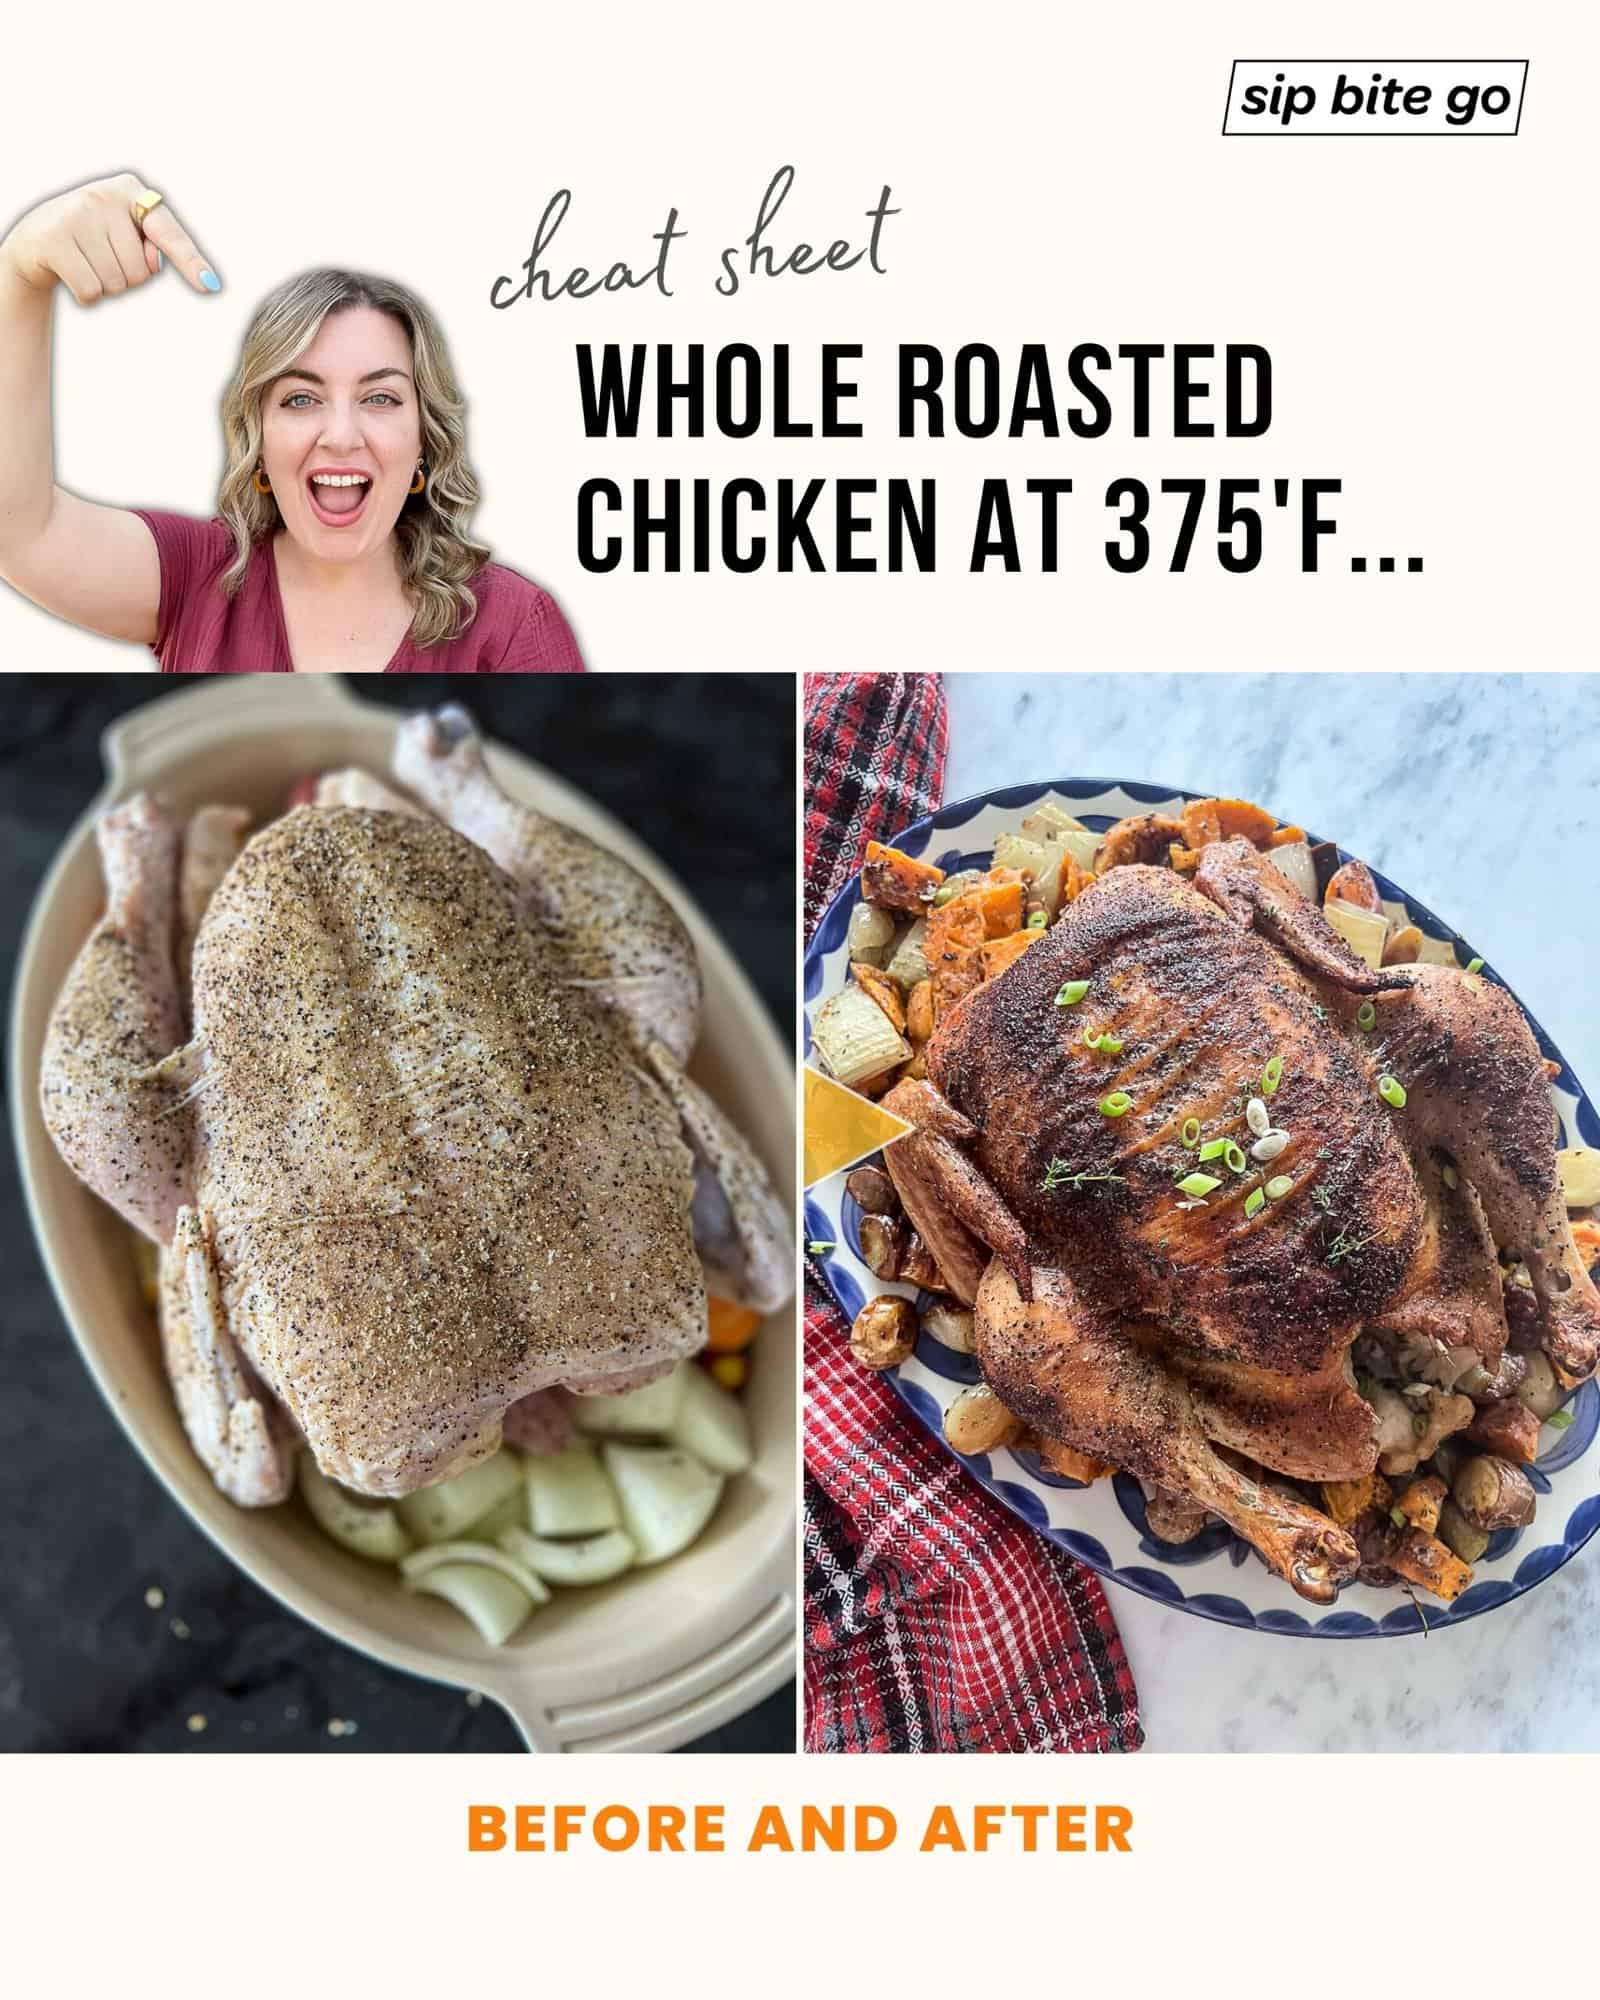 Infographic with before and after of chicken roasted at 375 degrees F